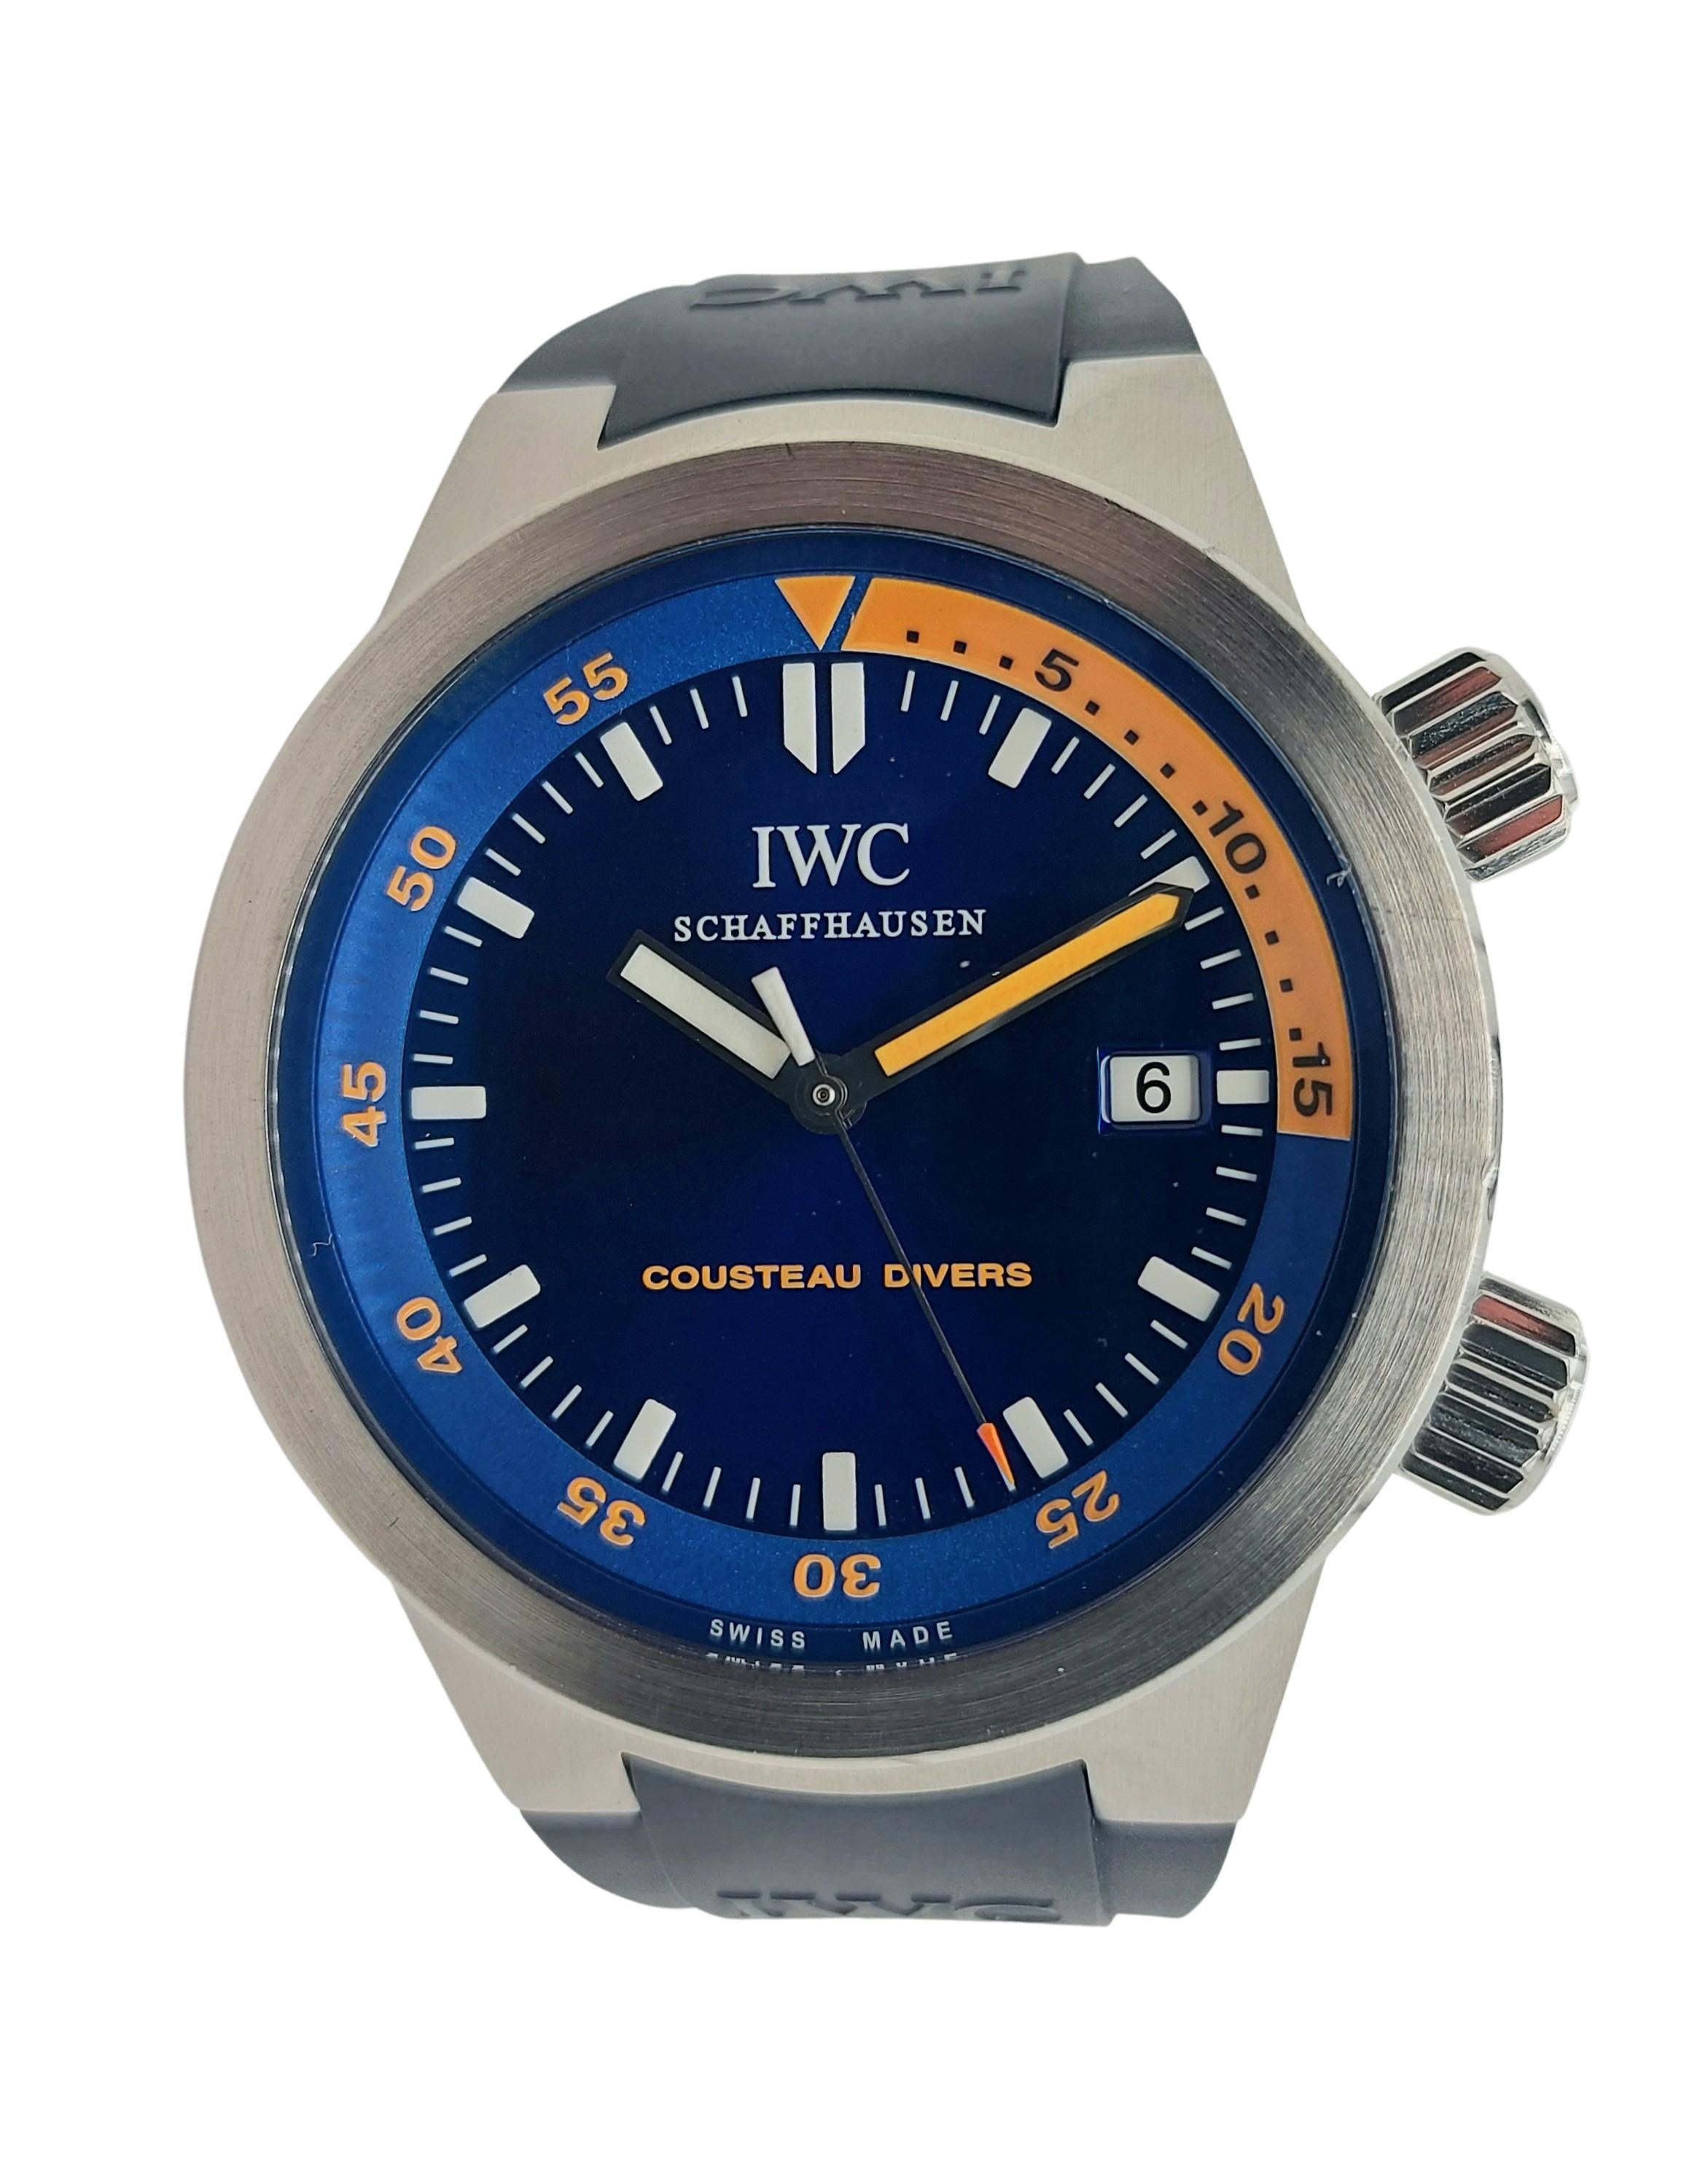 IWC Aquatimer Cousteau Diver, Automatic, Diameter 42mm, Full set! Top Condition

Movement: Automatic

Model: Aquatimer

Functions: Hour, Minutes, Seconds, Date window by 3 o'clock,  

Case: Stainless steel case, Diameter 42 mm, Thickness 13 mm,